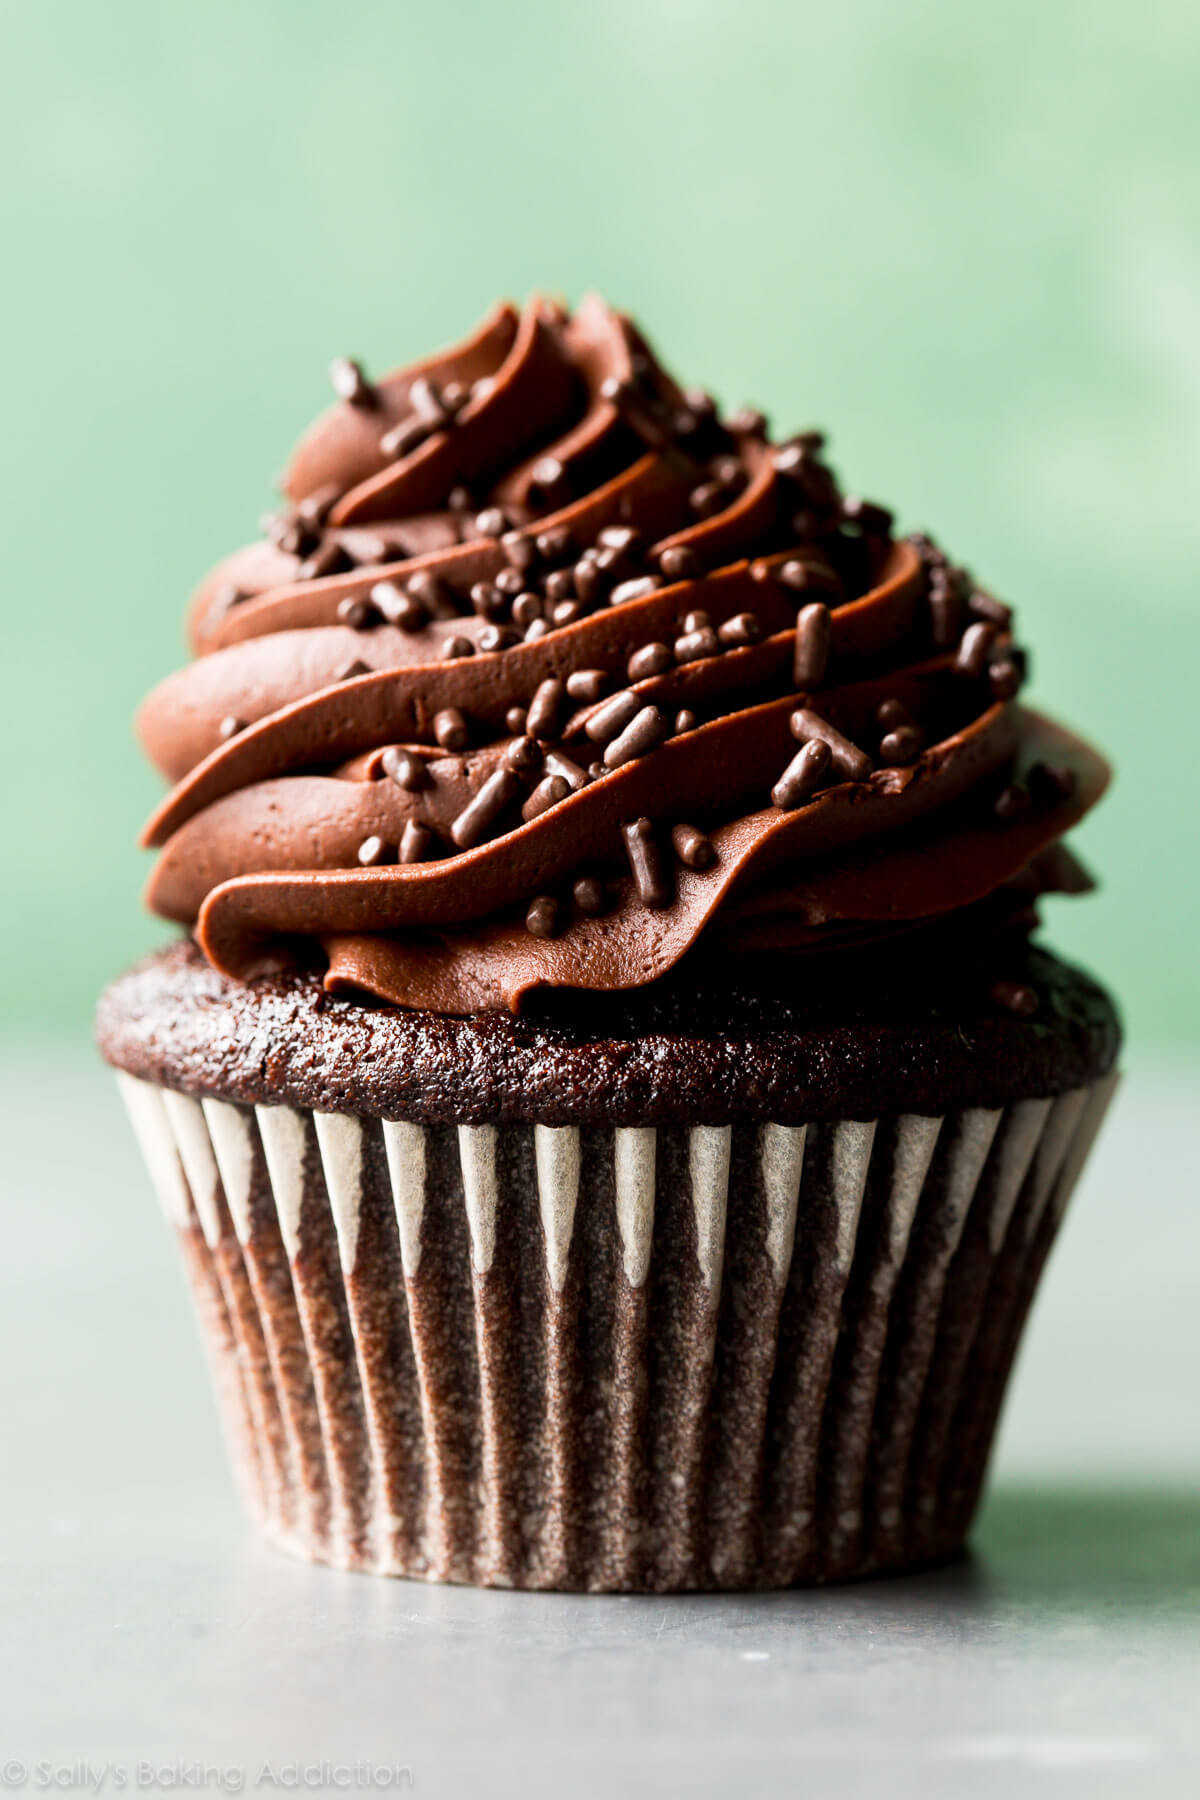 Best Chocolate Cupcakes
 Classic Chocolate Cupcakes with Vanilla Frosting Sallys